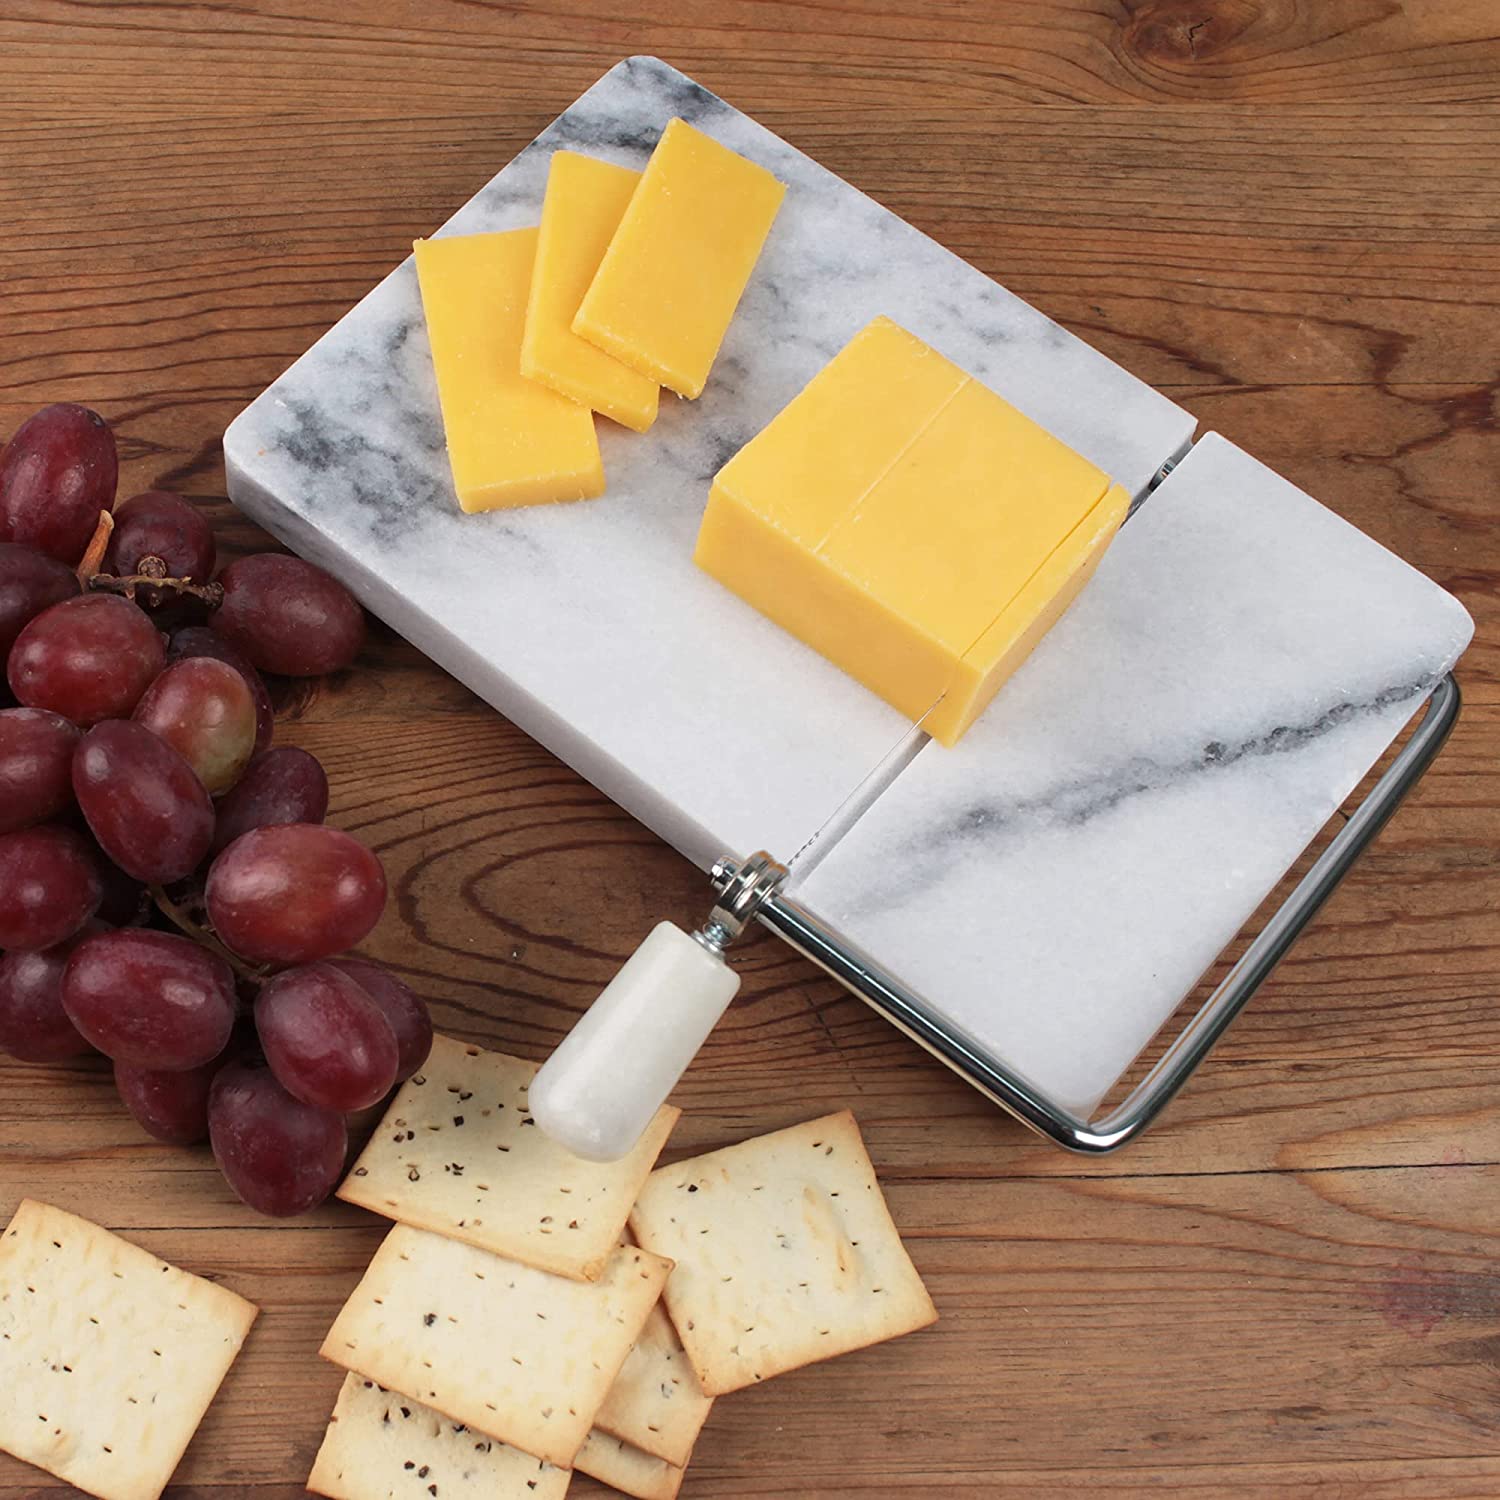 https://www.wideopencountry.com/wp-content/uploads/sites/4/eats/2021/07/RSVP-International-White-Marble-Cheese-Slicer-Cutting-Board-522-x-822-Cut-Cheeses-Meats-Other-Appetizers-Each-Piece-Unique-in-Marble-Coloring-Stainless-Steel-Wire-Cheese-Slicer-.jpg?resize=1500%2C1500